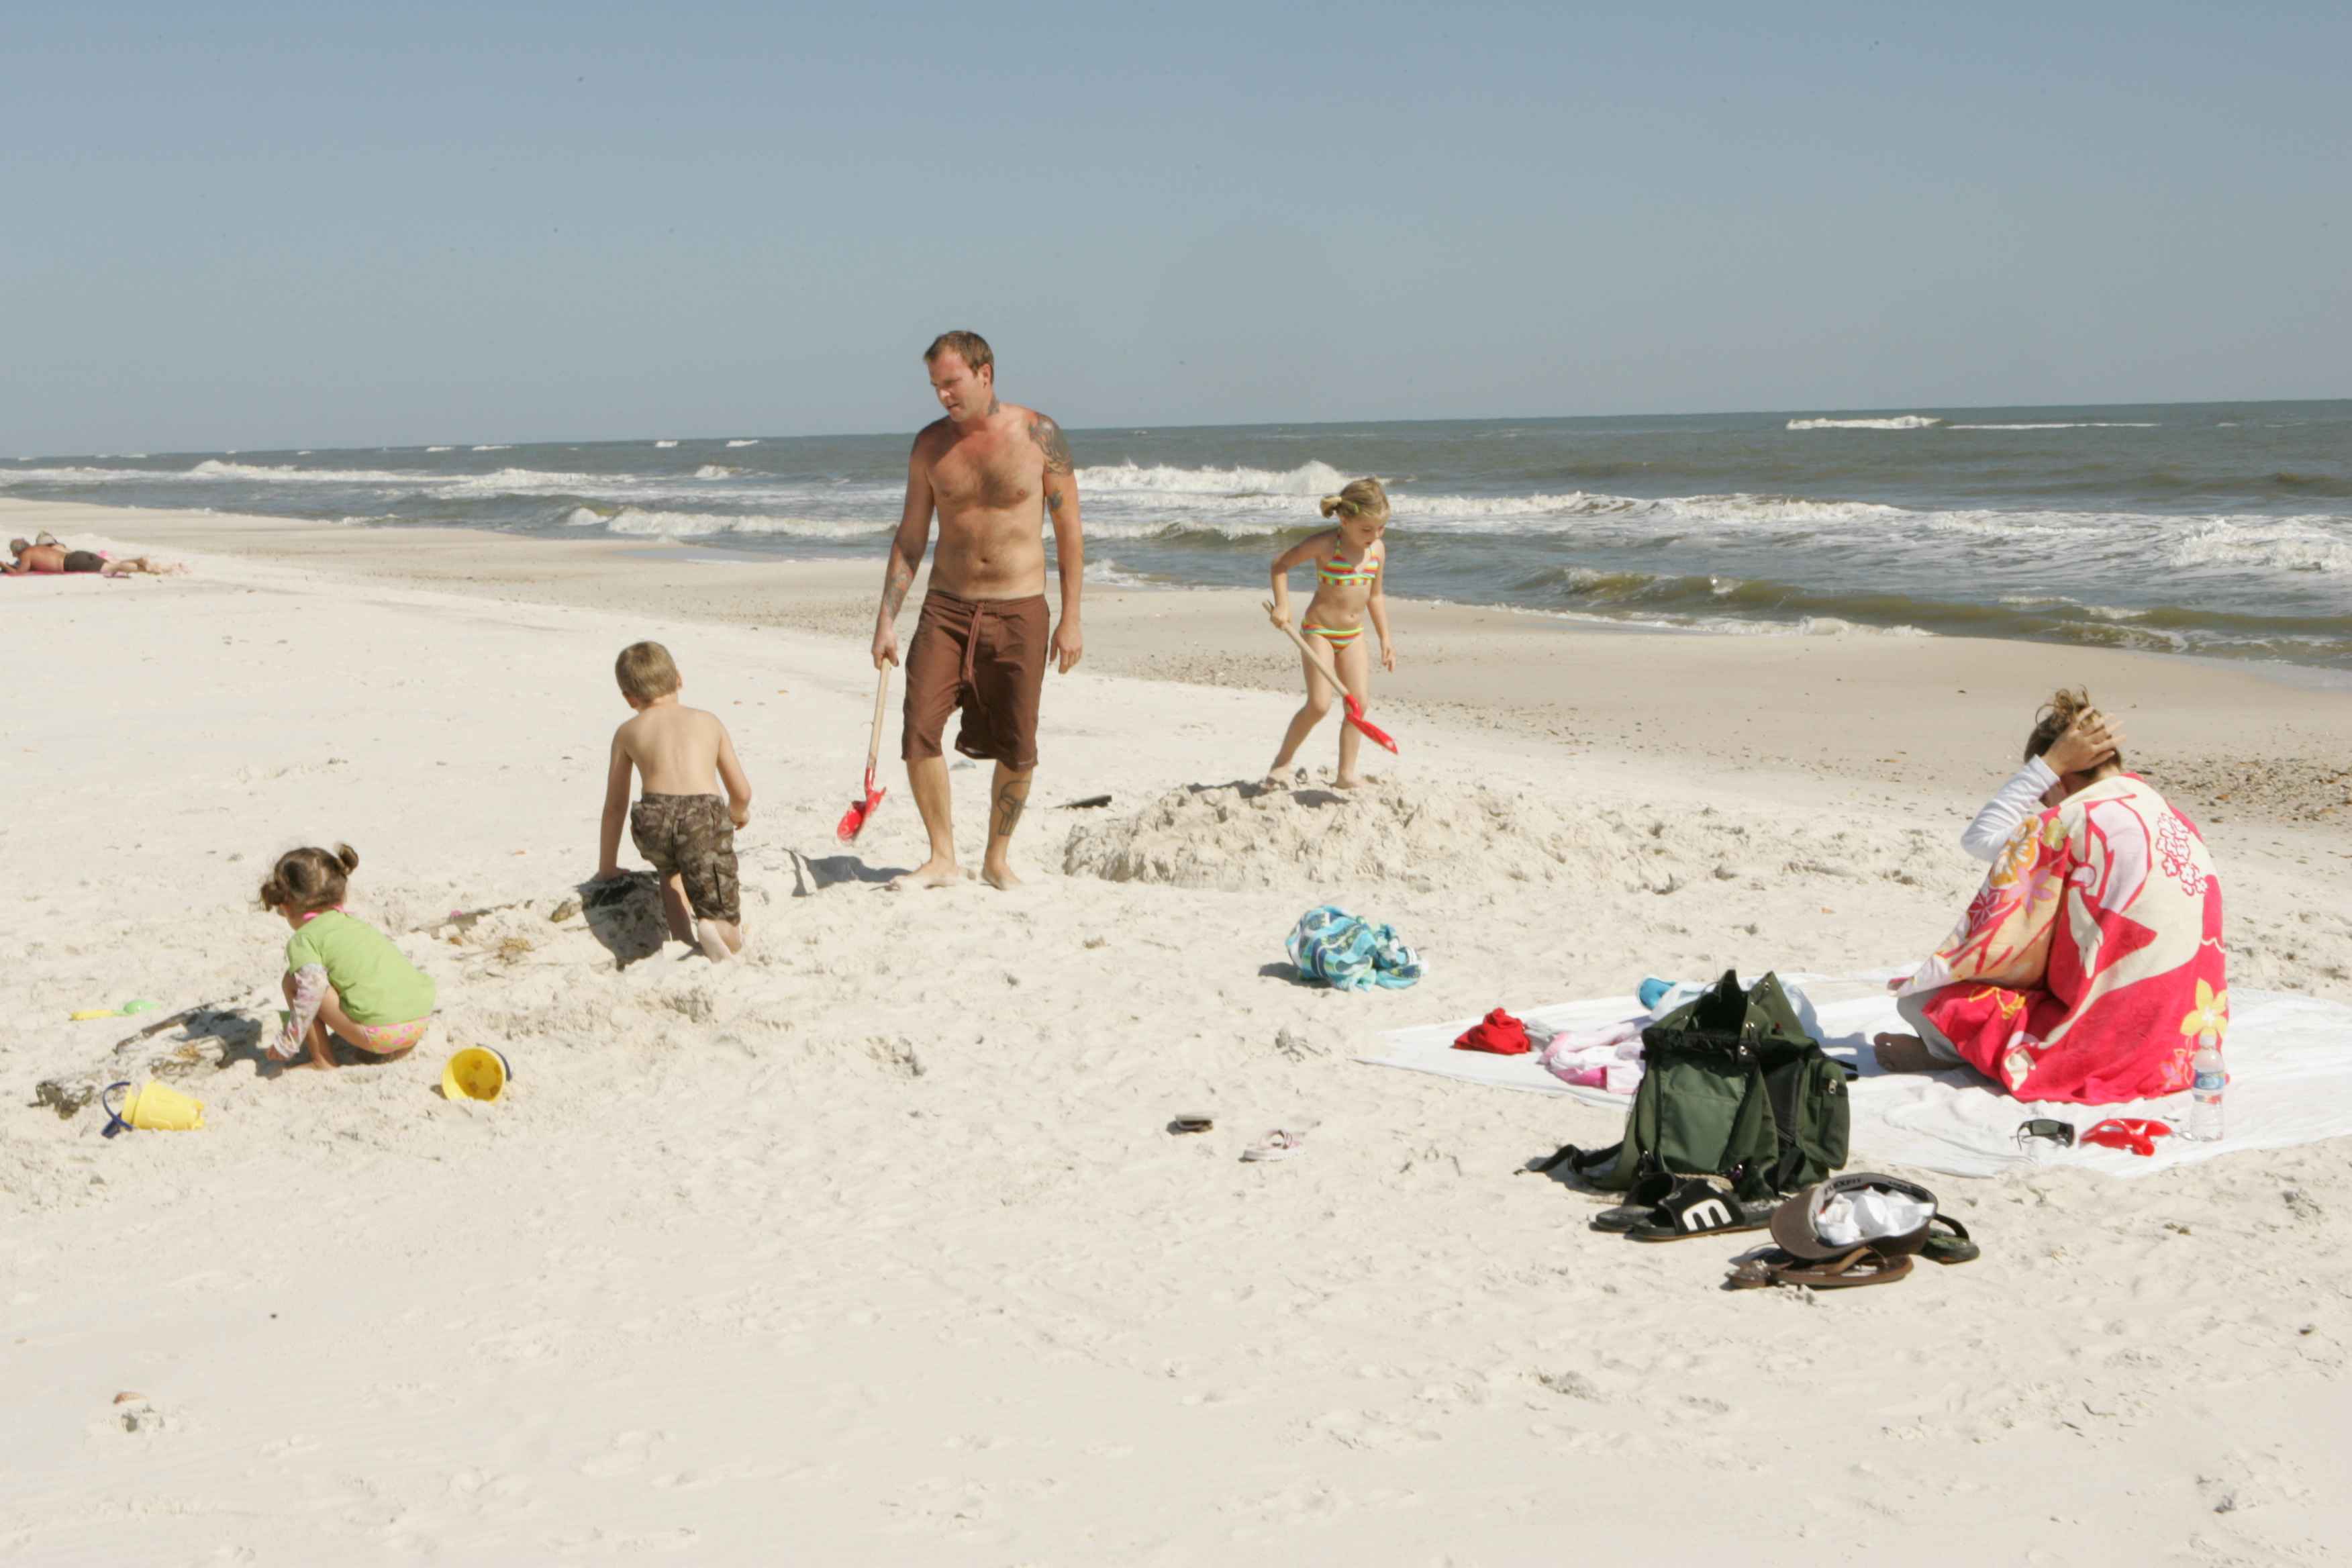 File:Family enjoys a perfect day at the beach.jpg - Wikimedia Commons